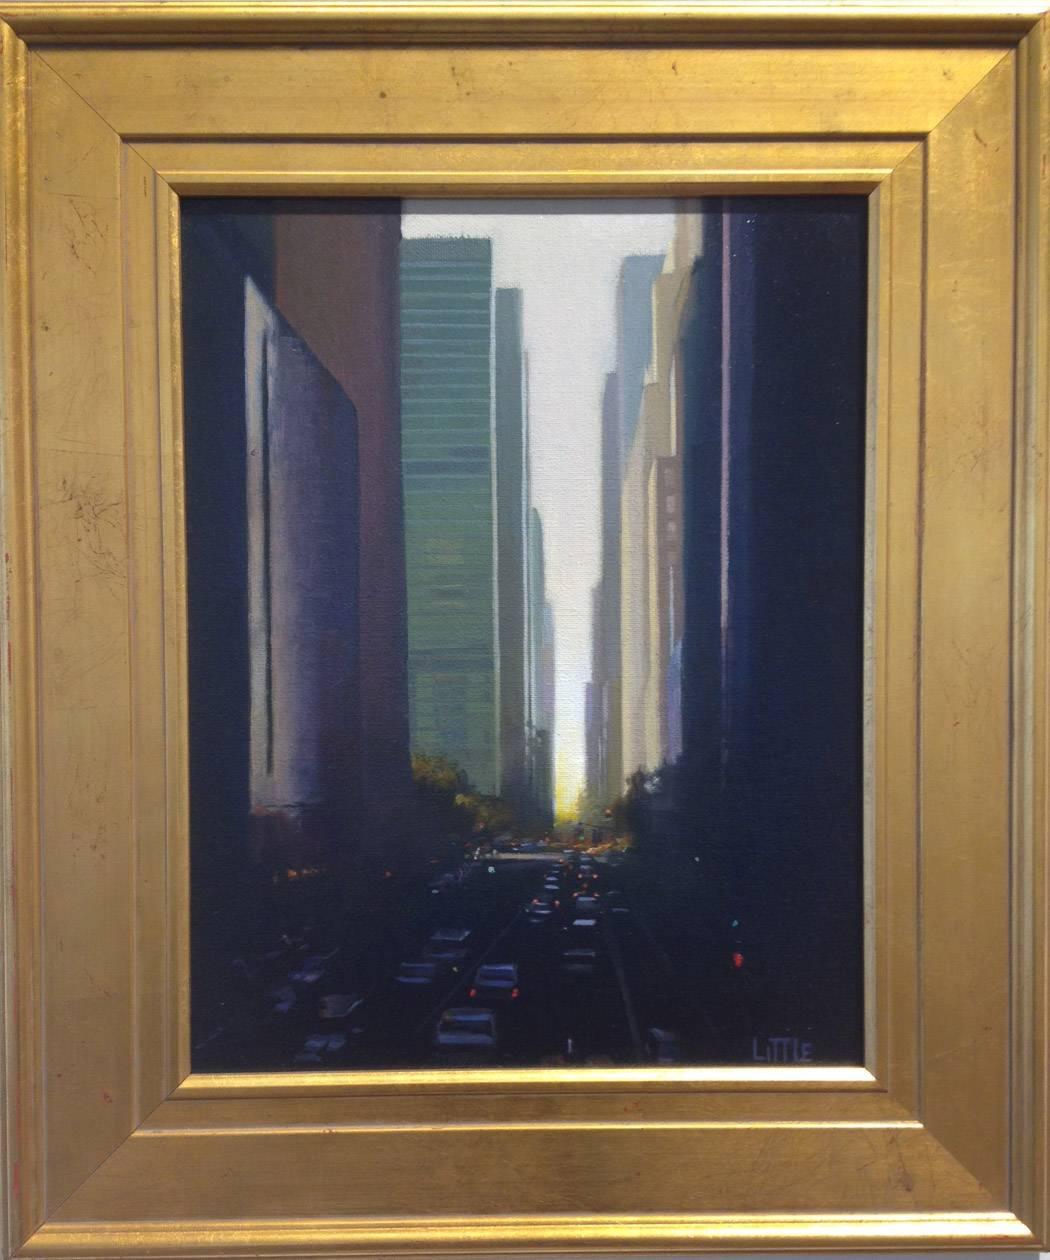 Another beautiful view of the City streets - enlightened by Mr. Ed Little, as he continues to awe us with his works. Tall buildings, trafficked streets and beautiful peeking skies have become a favorite subject for him.

ABOUT ED LITTLE

Edward